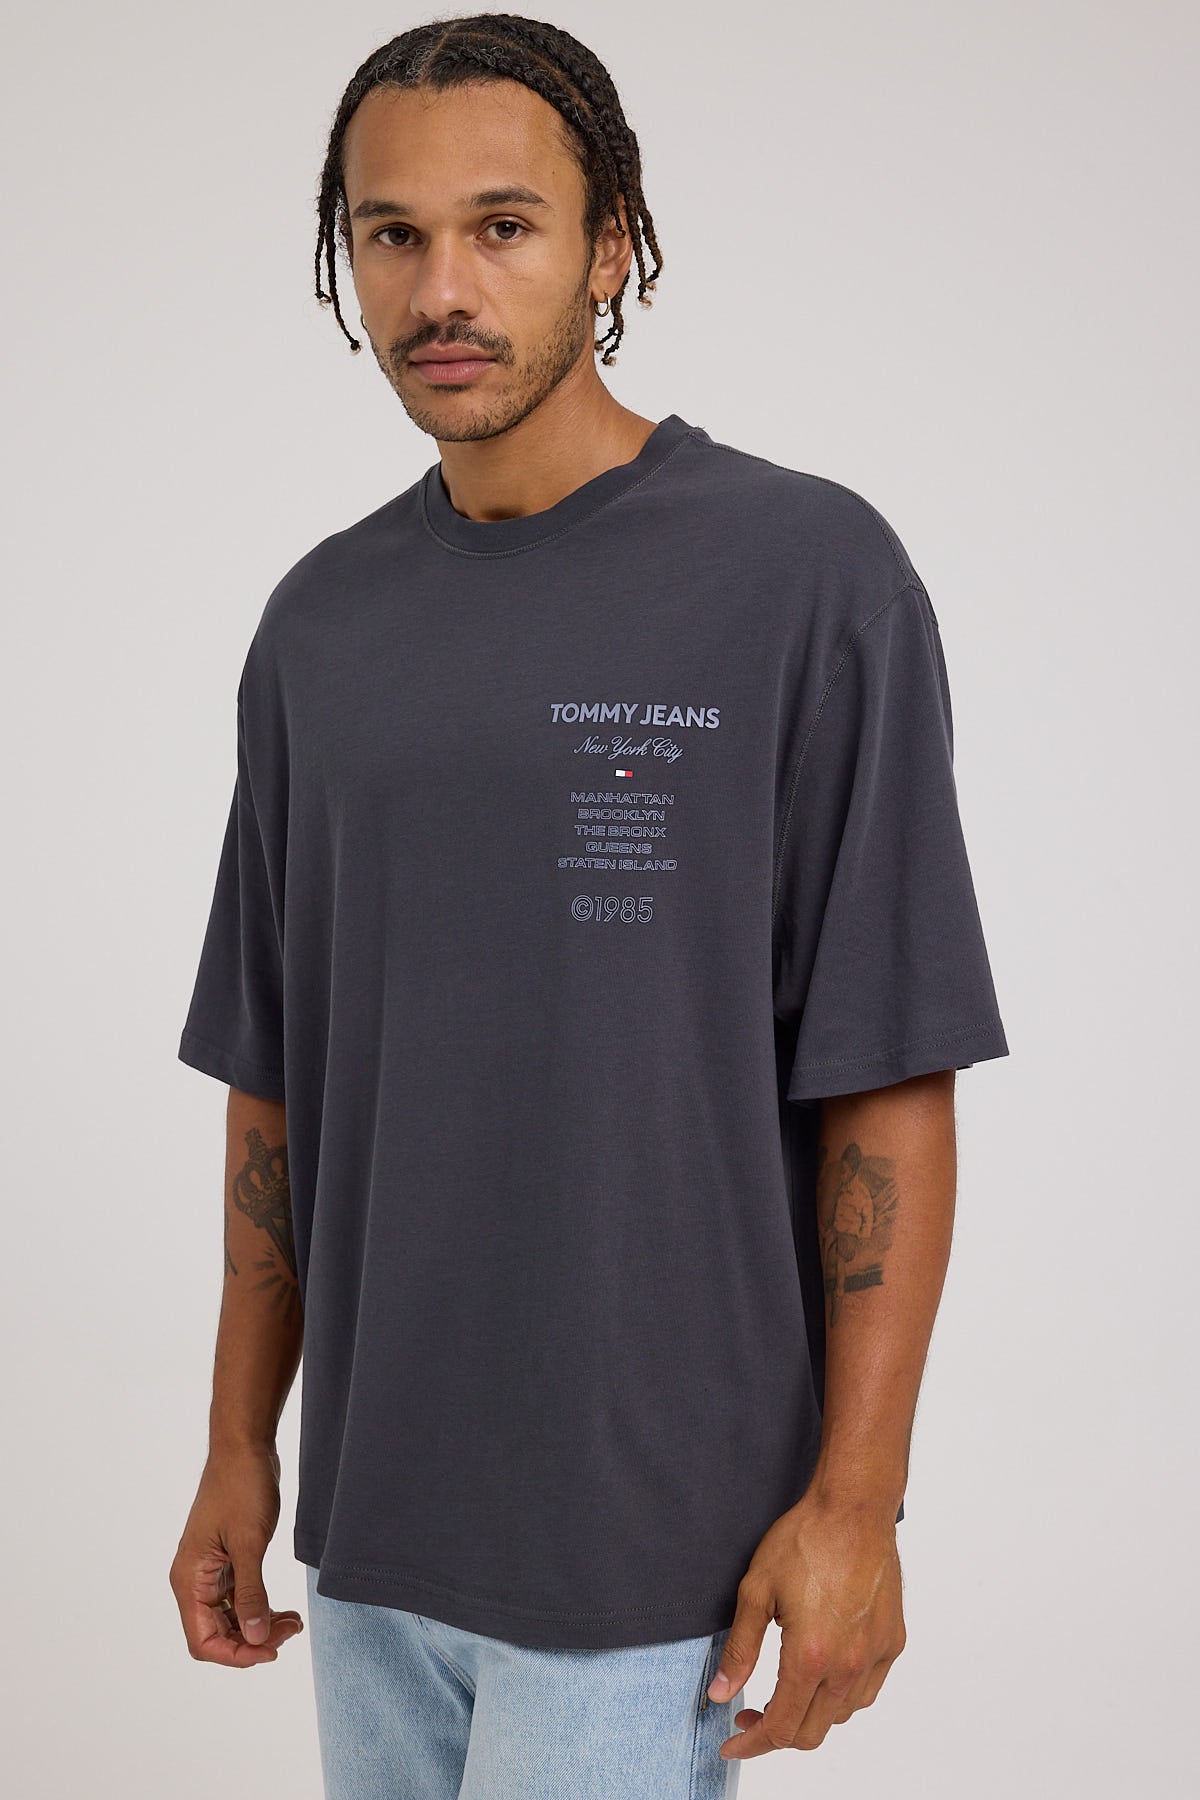 Tommy Jeans Oversized TJ NYC 1985 Cities Tee New Charcoal – Universal Store